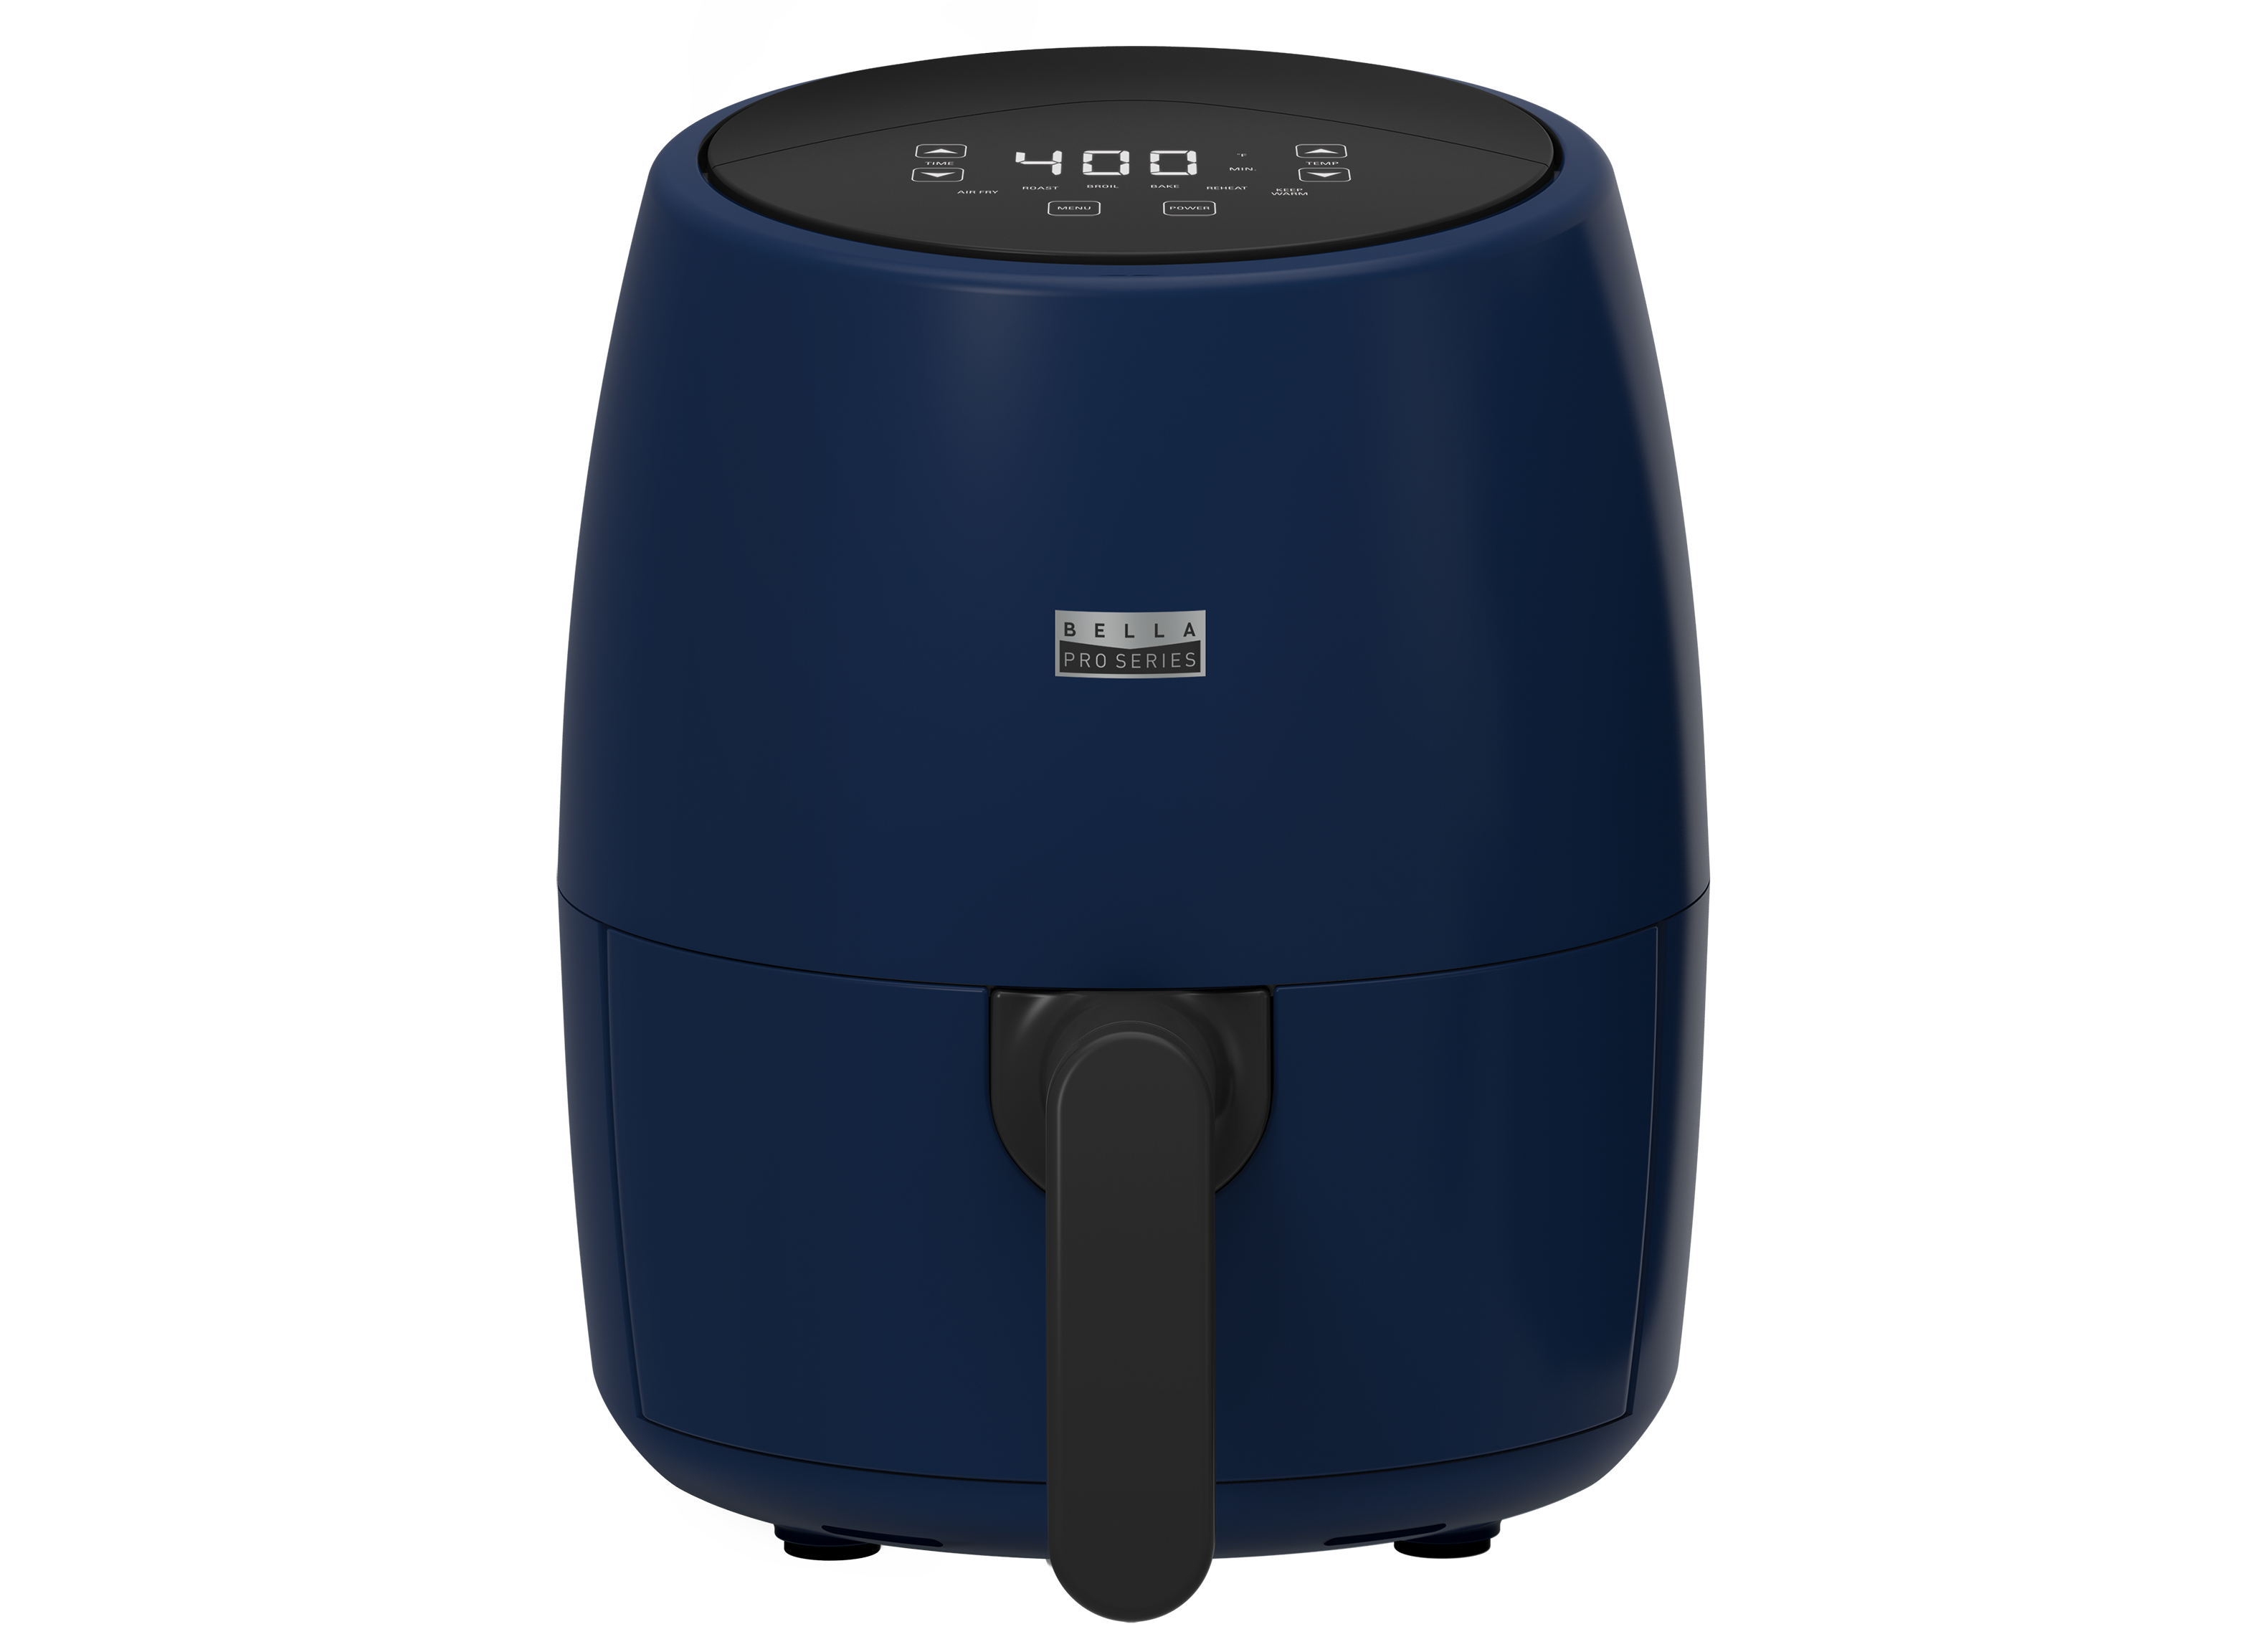 Bella Pro Series 90146 Air Fryer Review - Consumer Reports